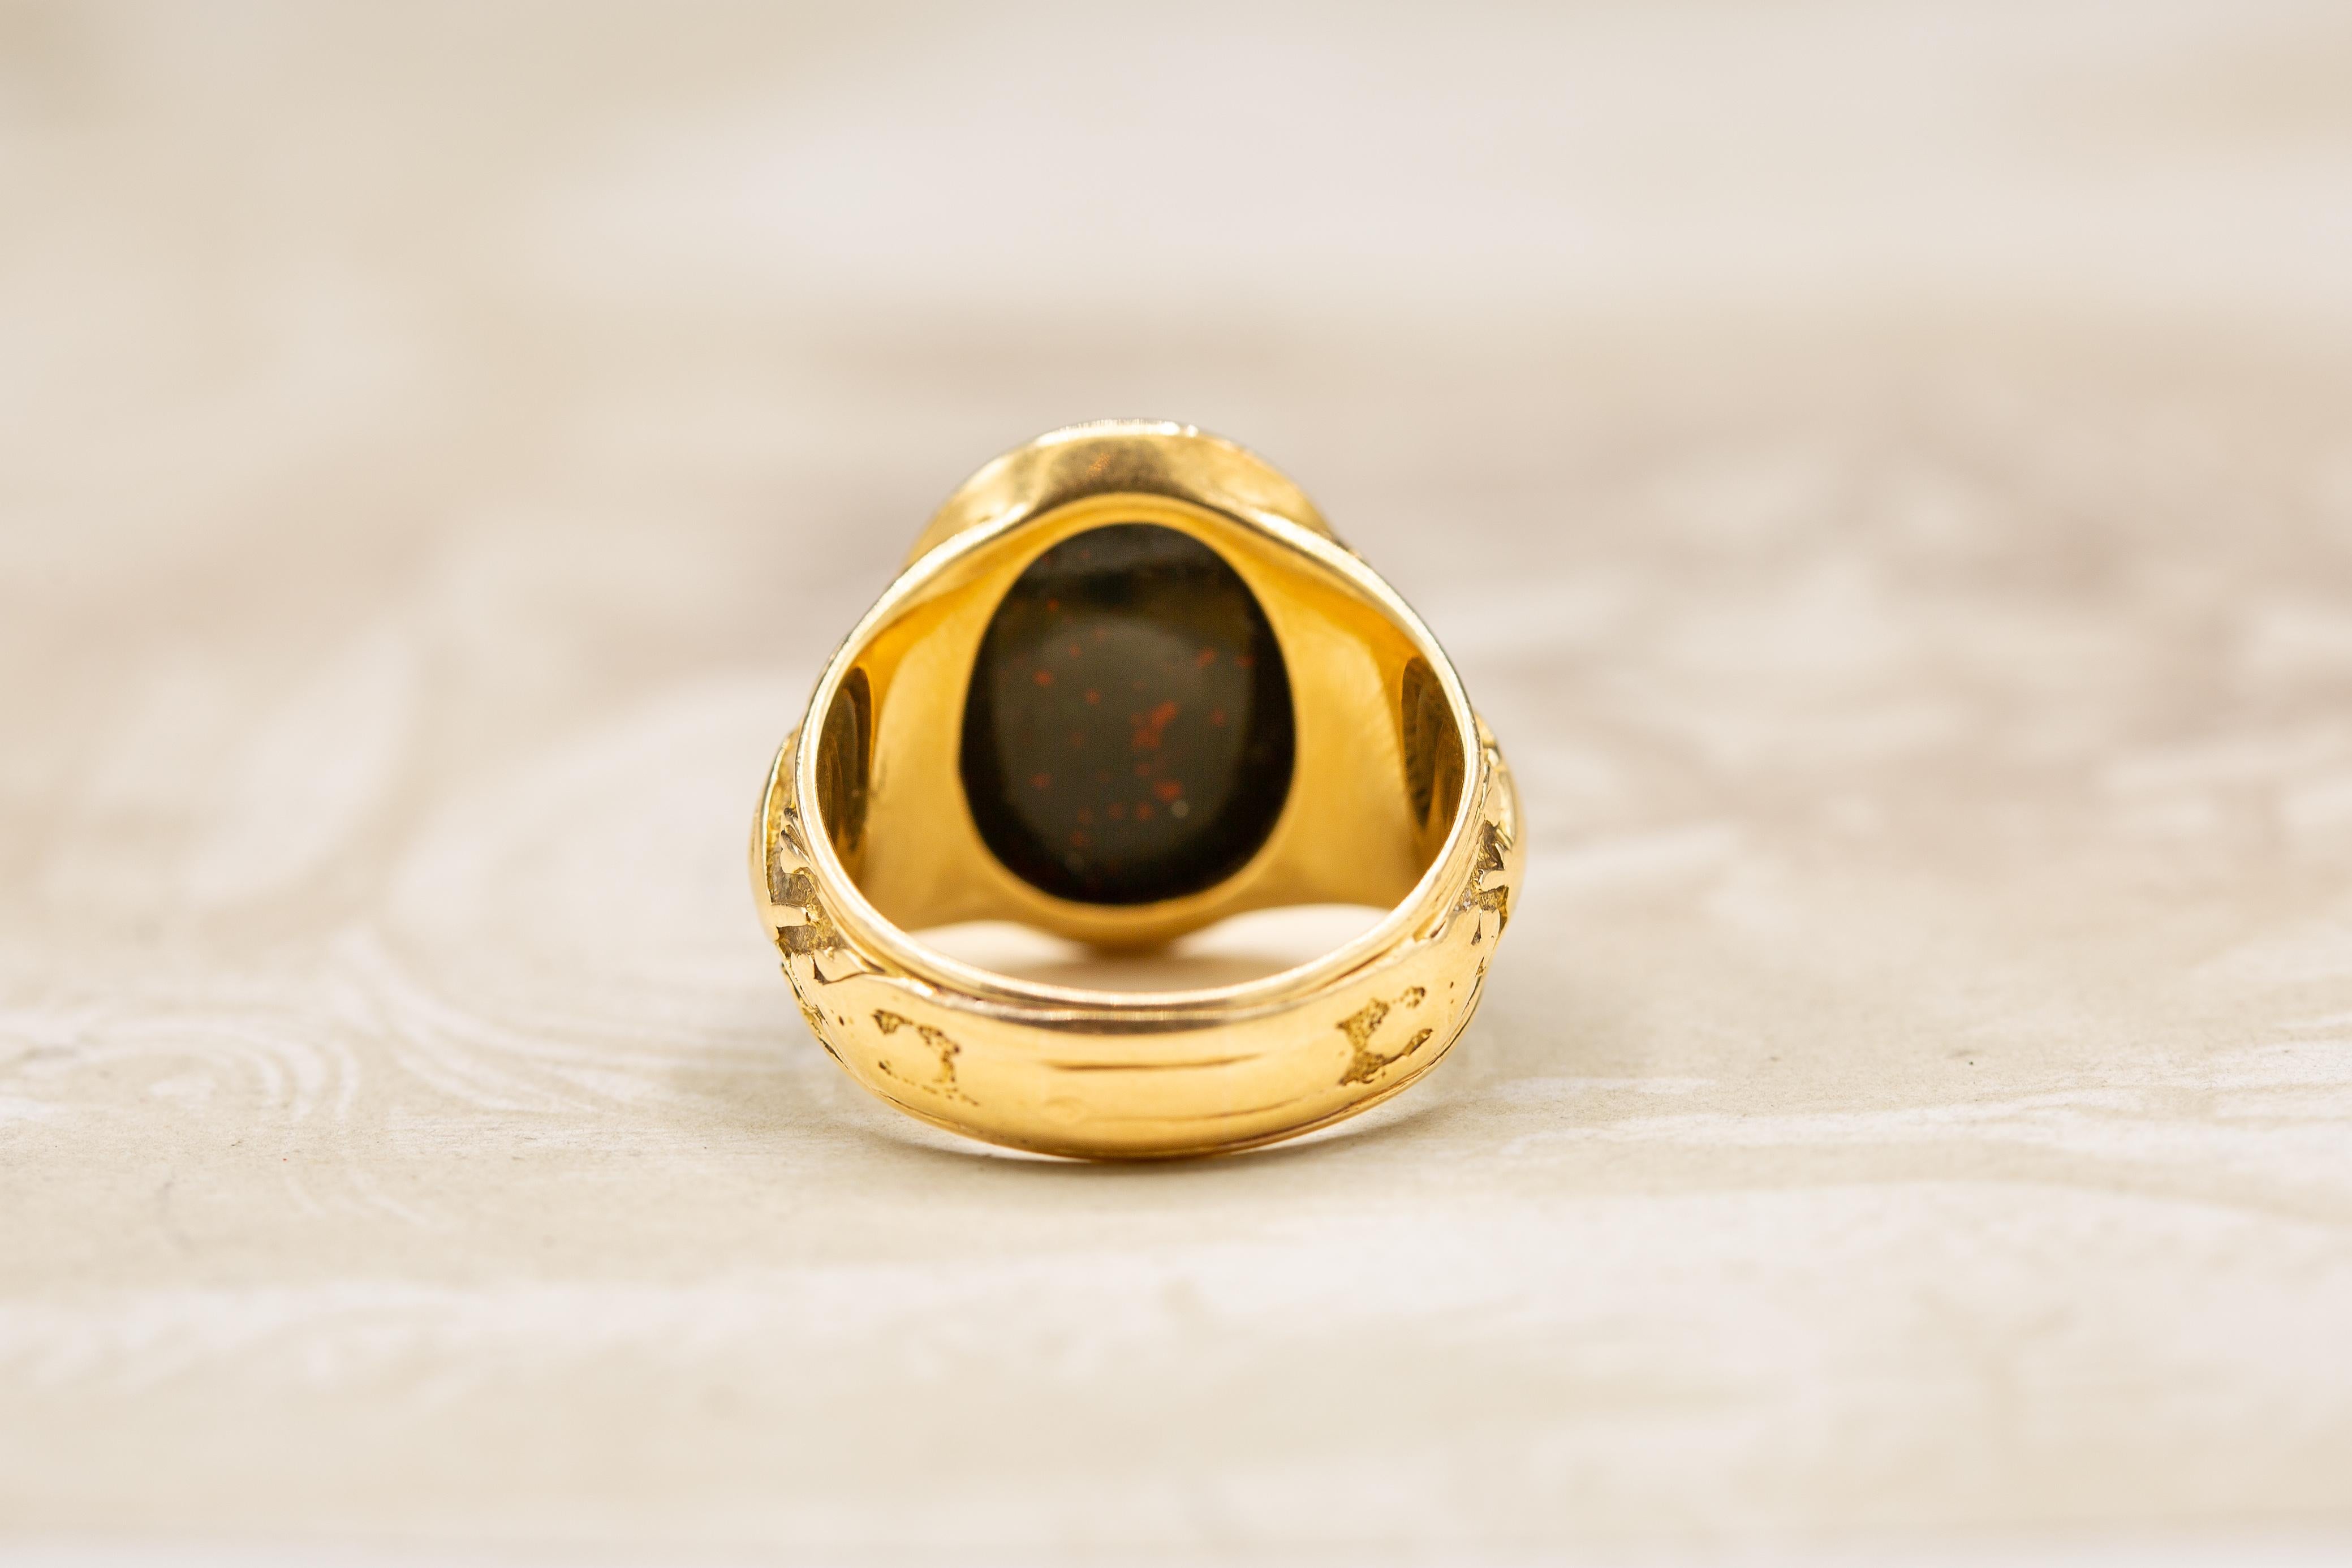 Antique Victorian Heavy 18K Gold Bloodstone Signet Ring Mens Coat of Arms c.1890 For Sale 1